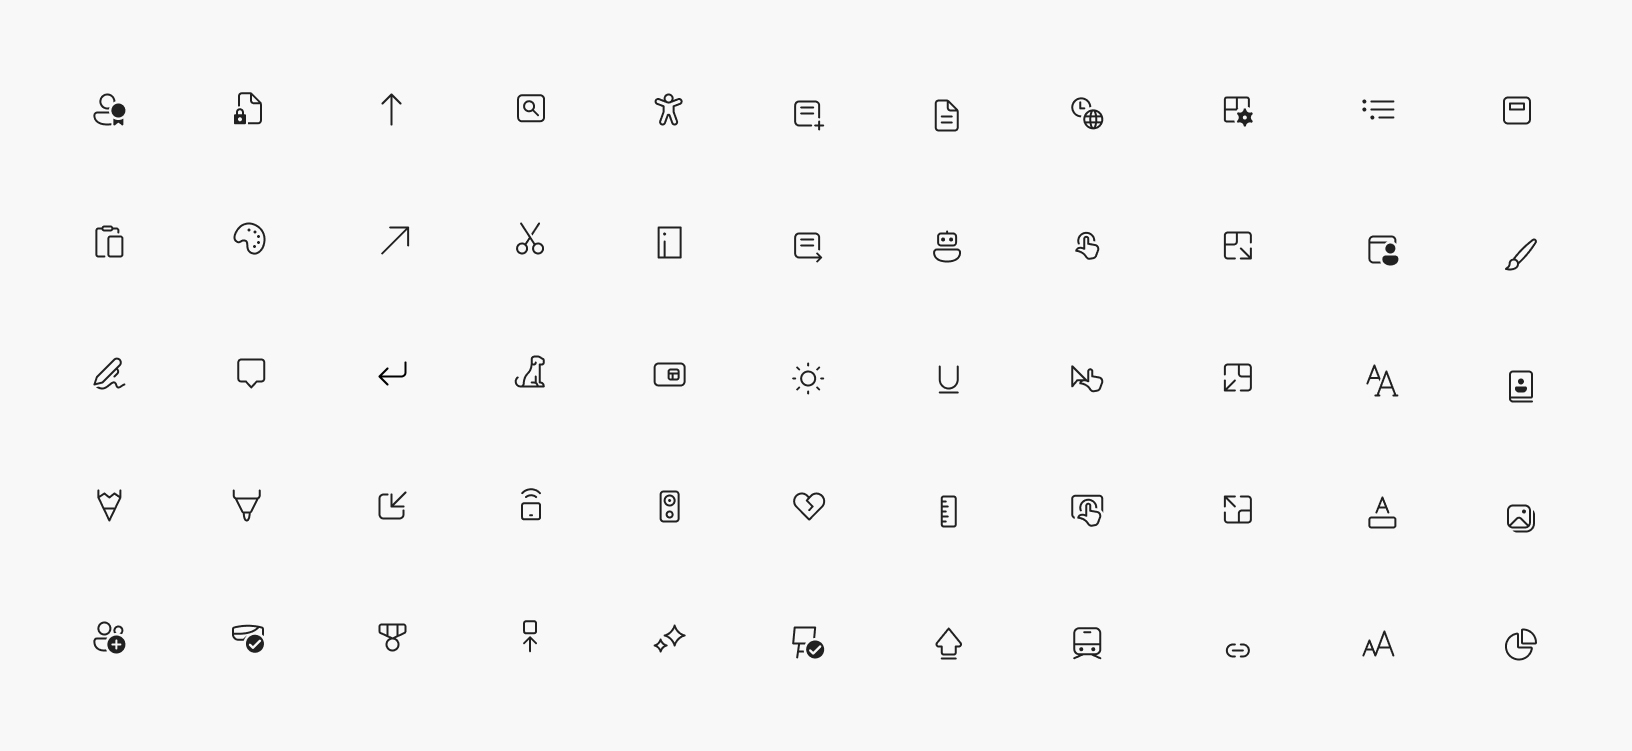 The new Segoe Fluent Icons font includes new icon designs which have a more rounded and simplified look and feel.